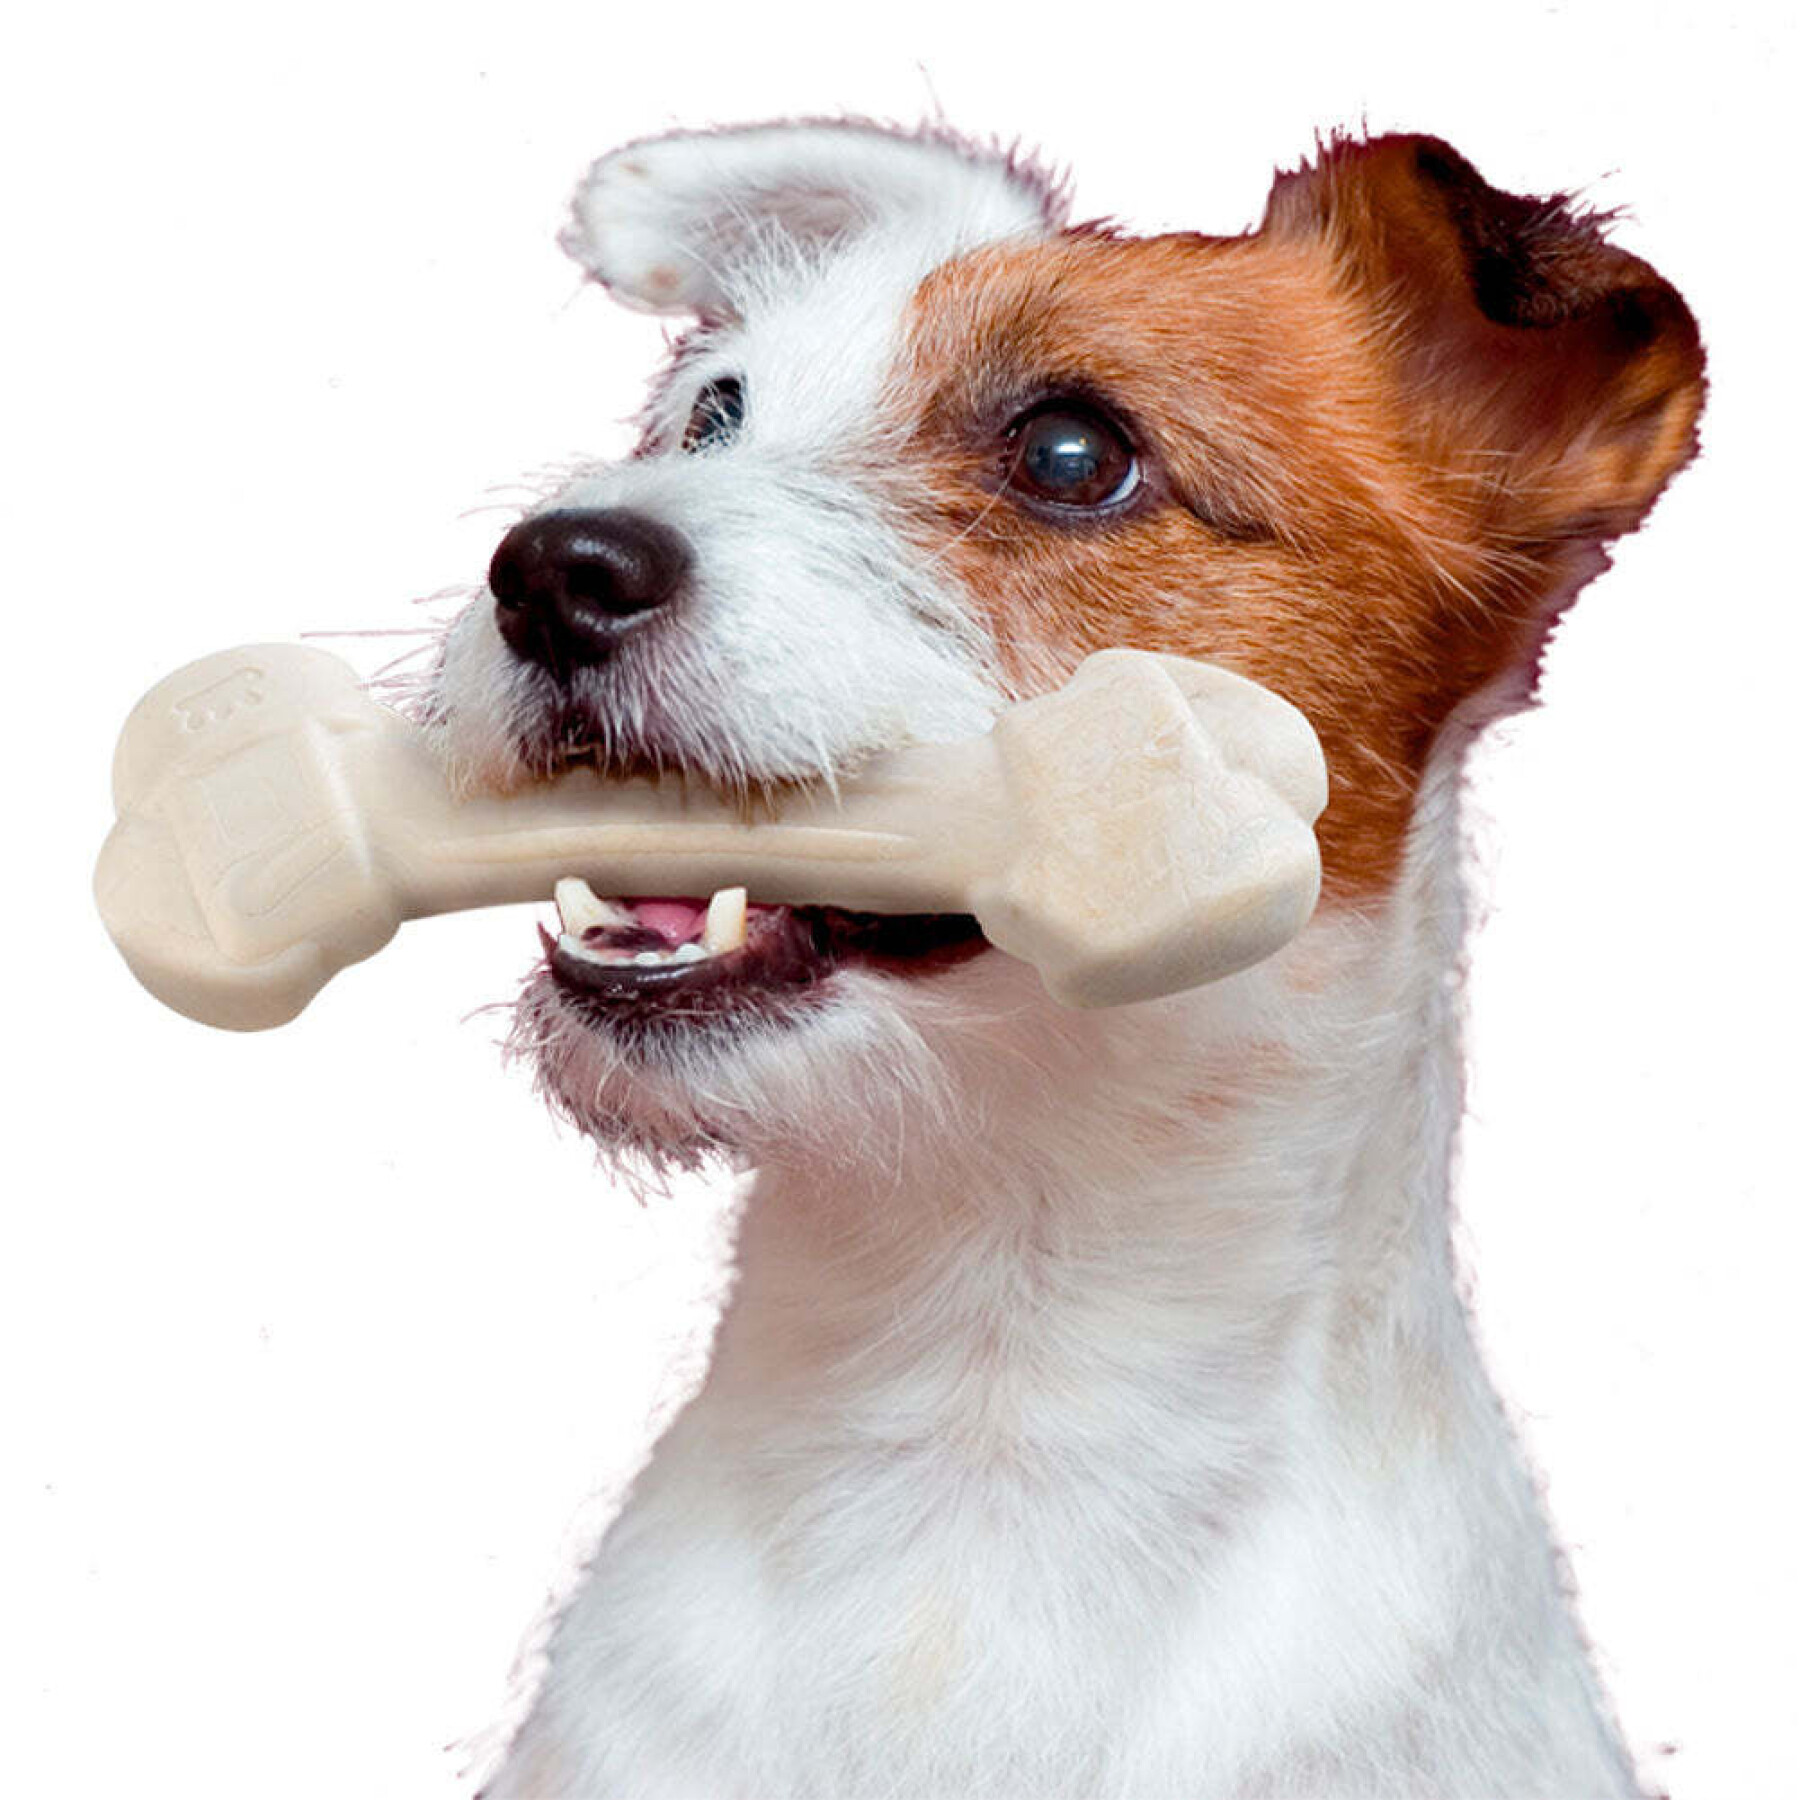 Chicken-flavored chew toy for dogs Ferplast